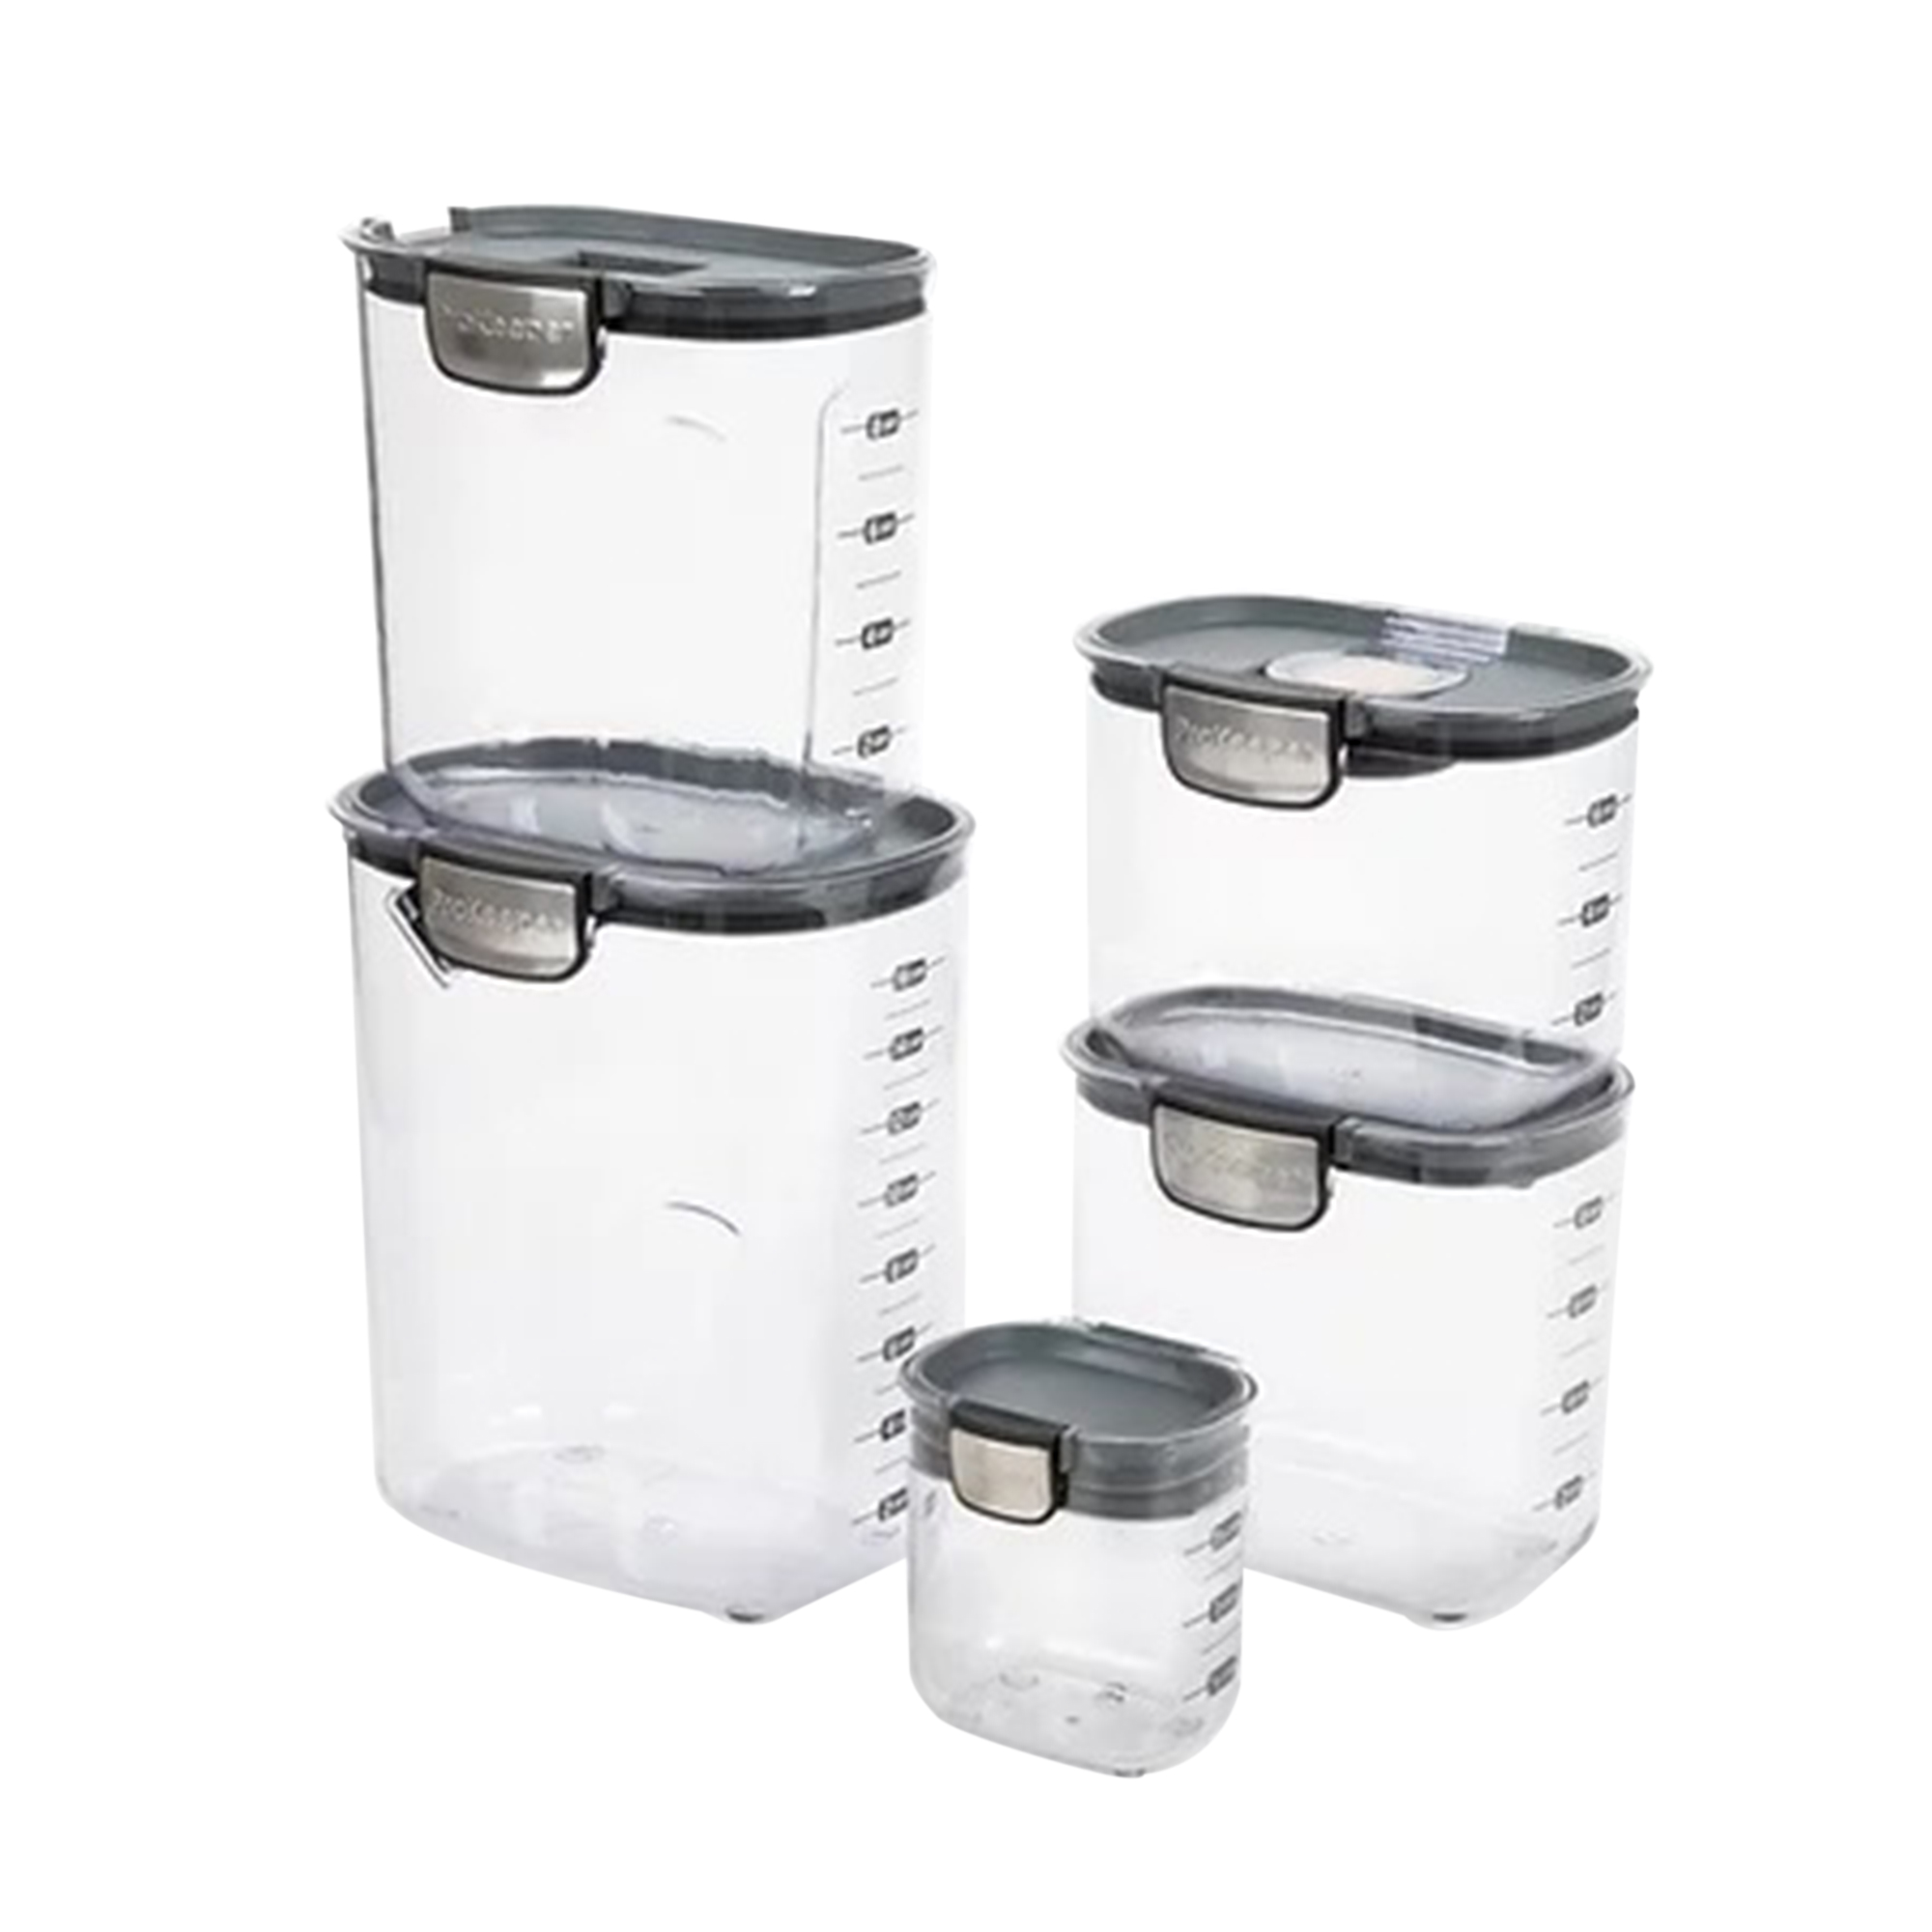 ProKeeper+ 9 Piece Clear Baker's Storage Container Set with Accessories - image 1 of 9